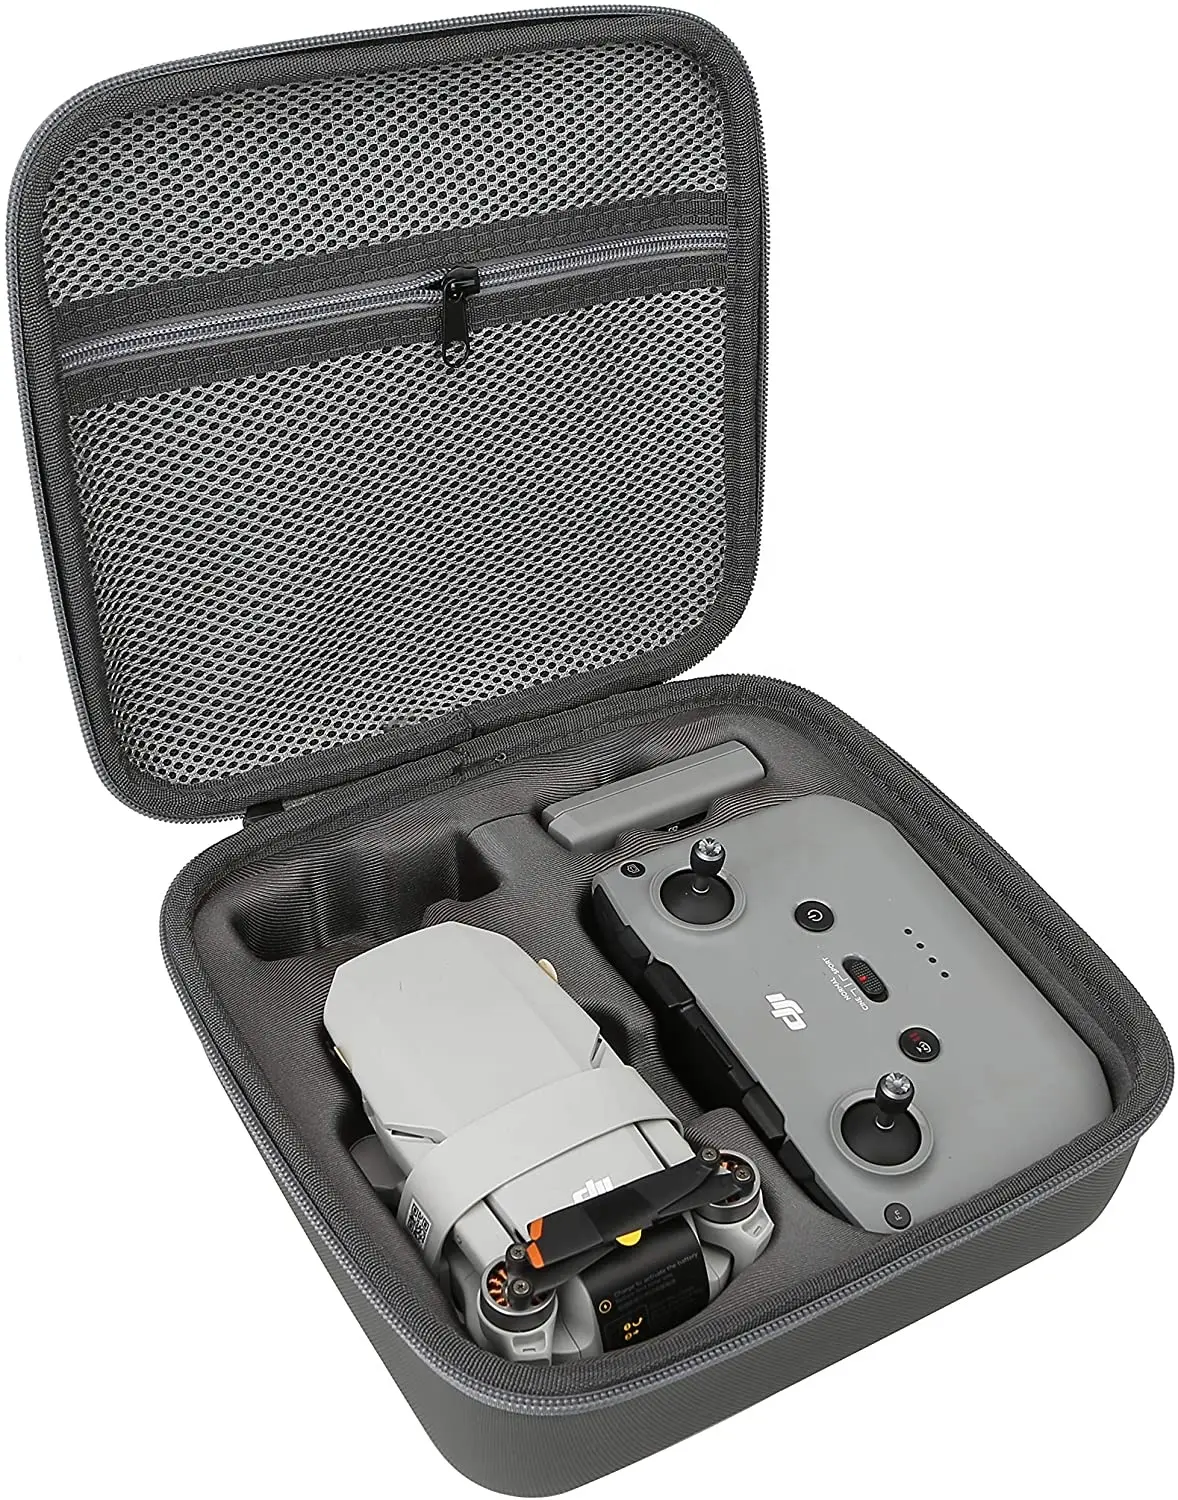 Storage Bag for DJI Mini 2 Drone Case Hard Shell Travel Carrying case Compatible with DJI Mini 2 Drone and Accessories-Grey.